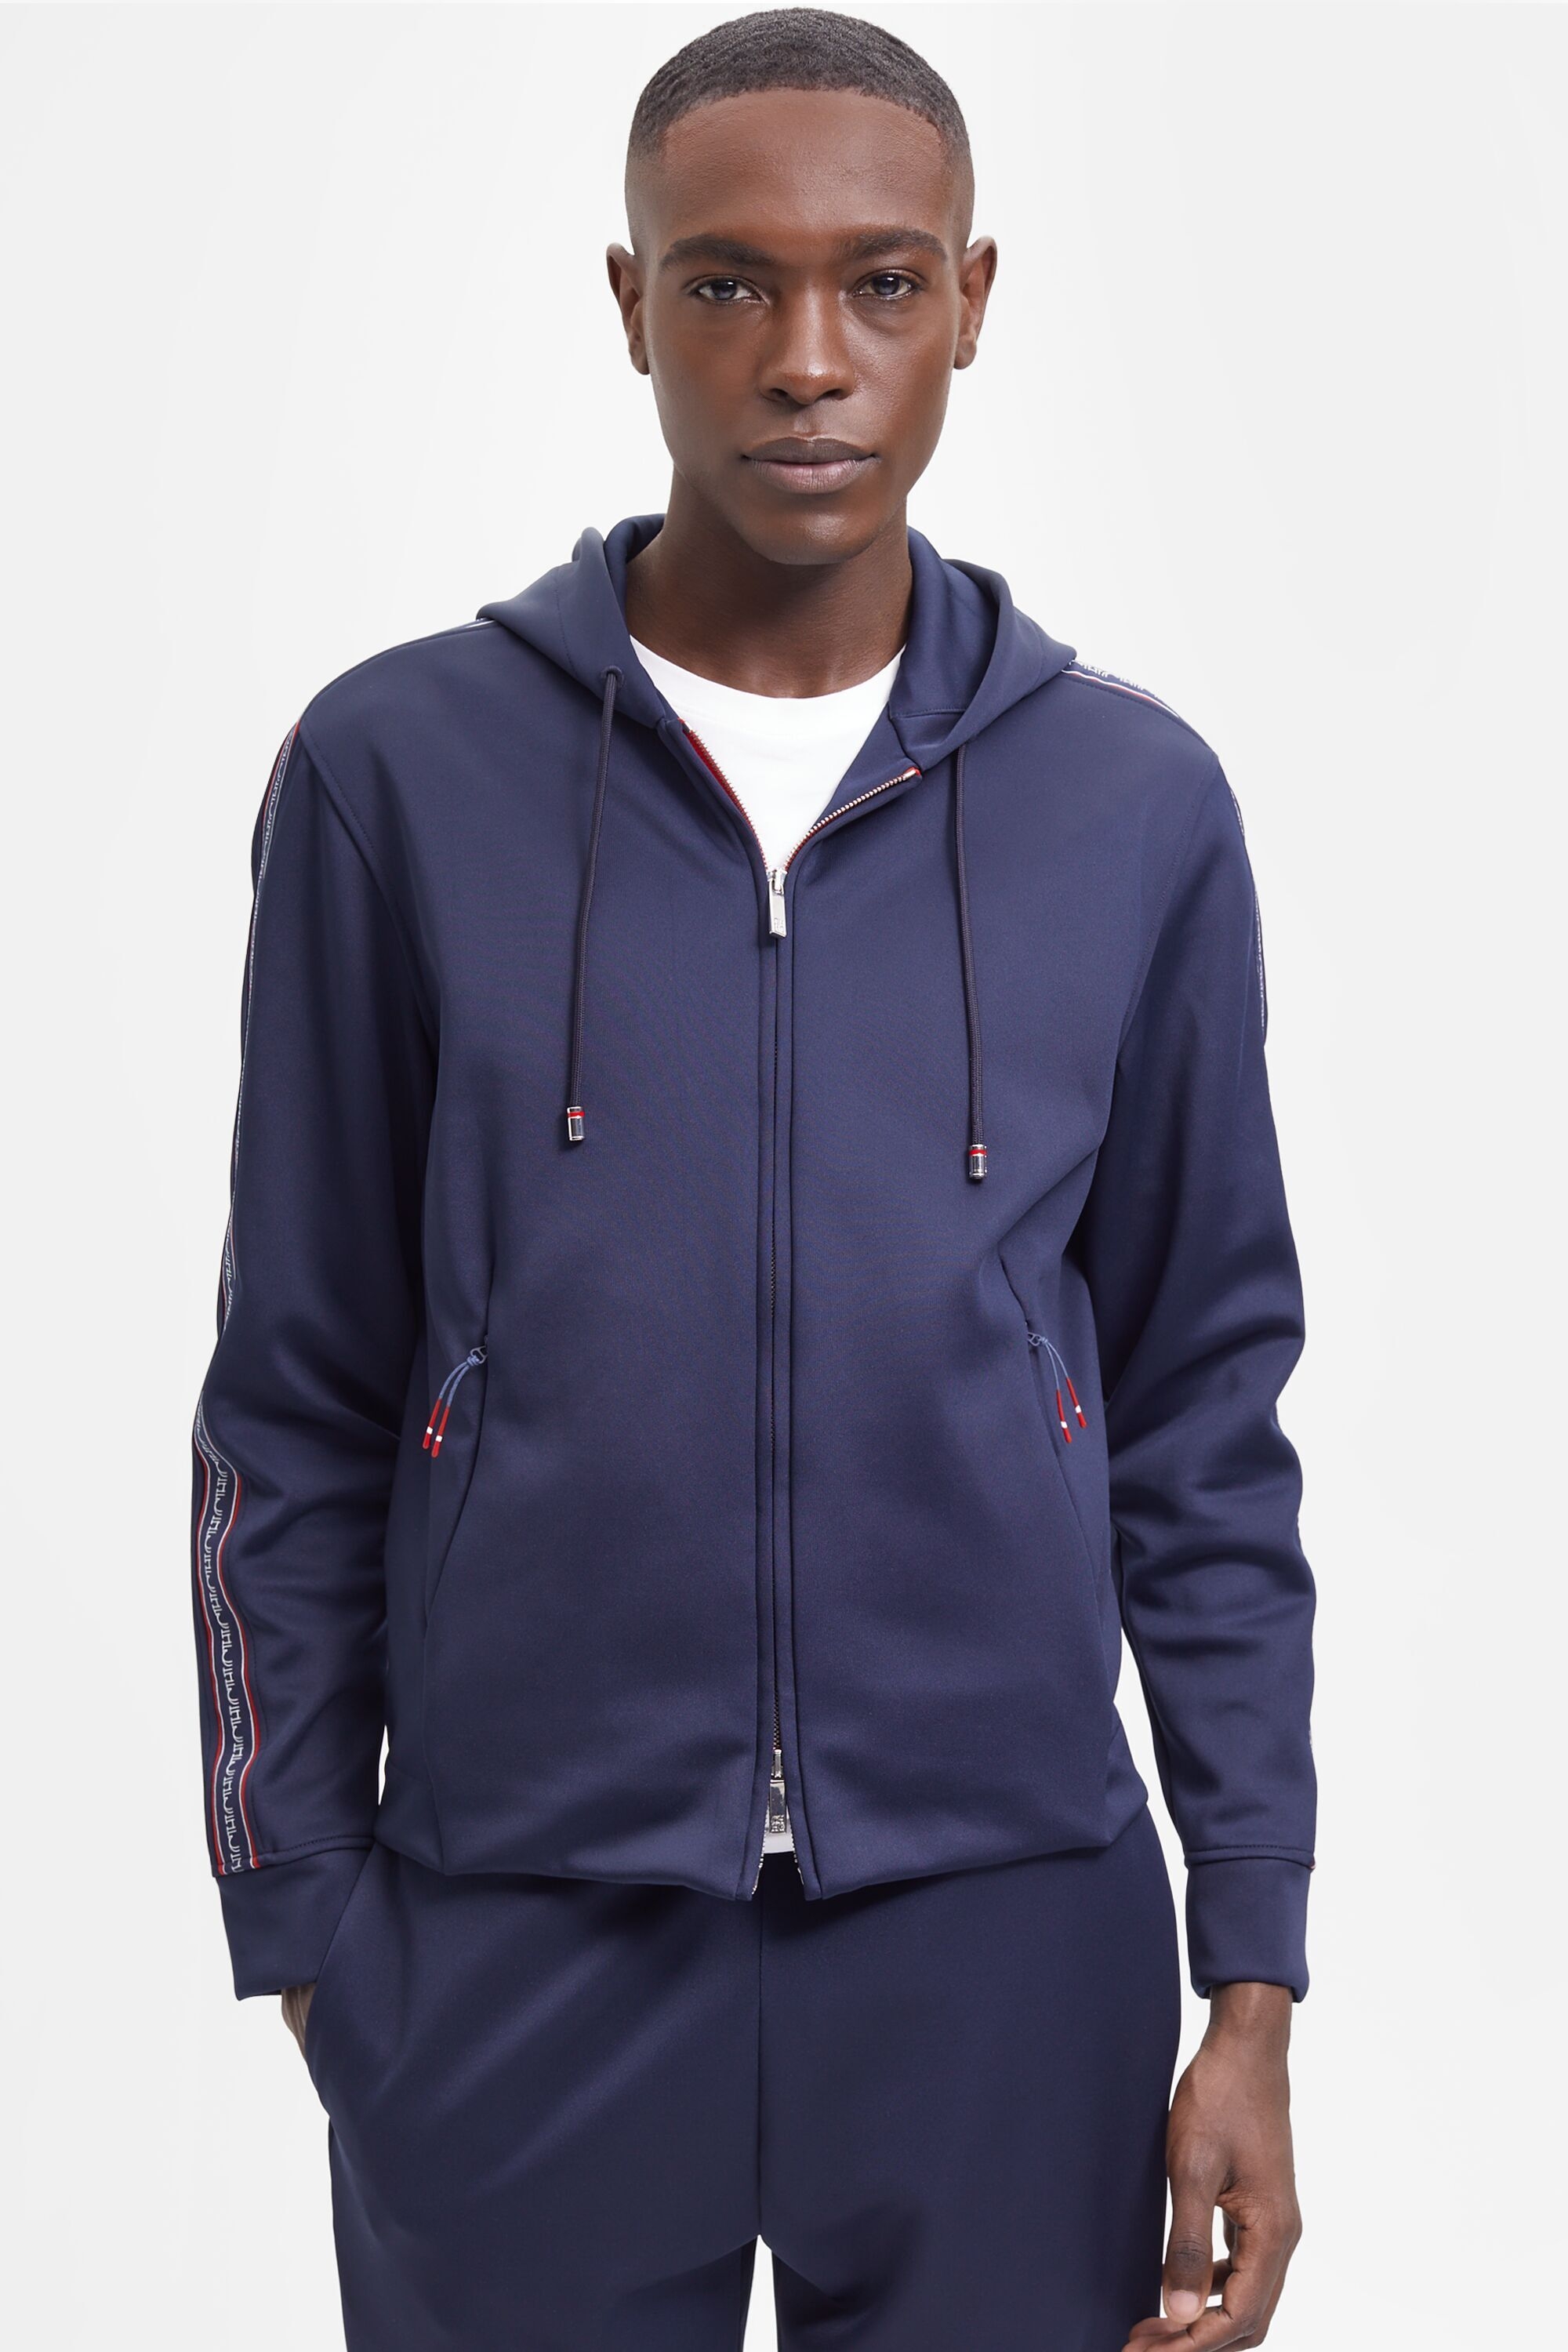 CH tape technical fabric zip-up hoodie